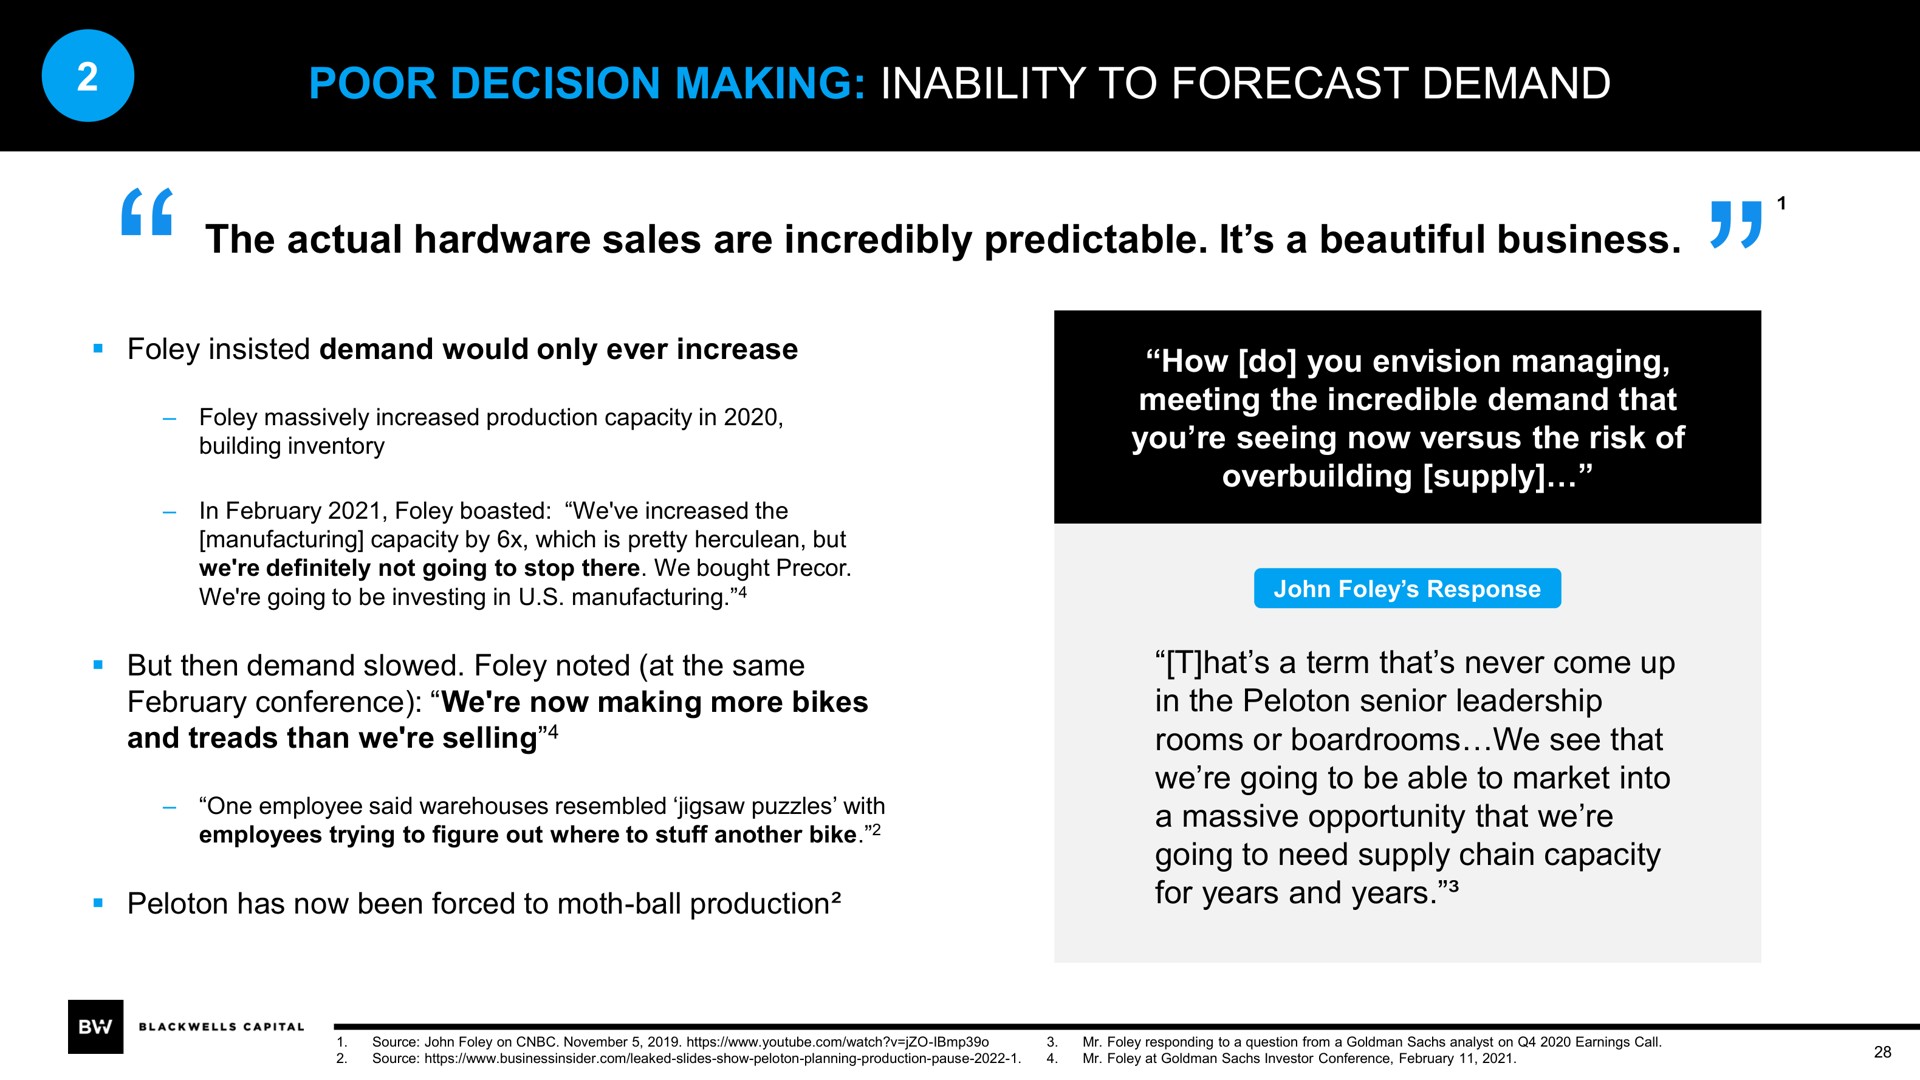 poor decision making inability to forecast demand the actual hardware sales are incredibly predictable it a beautiful business | Blackwells Capital